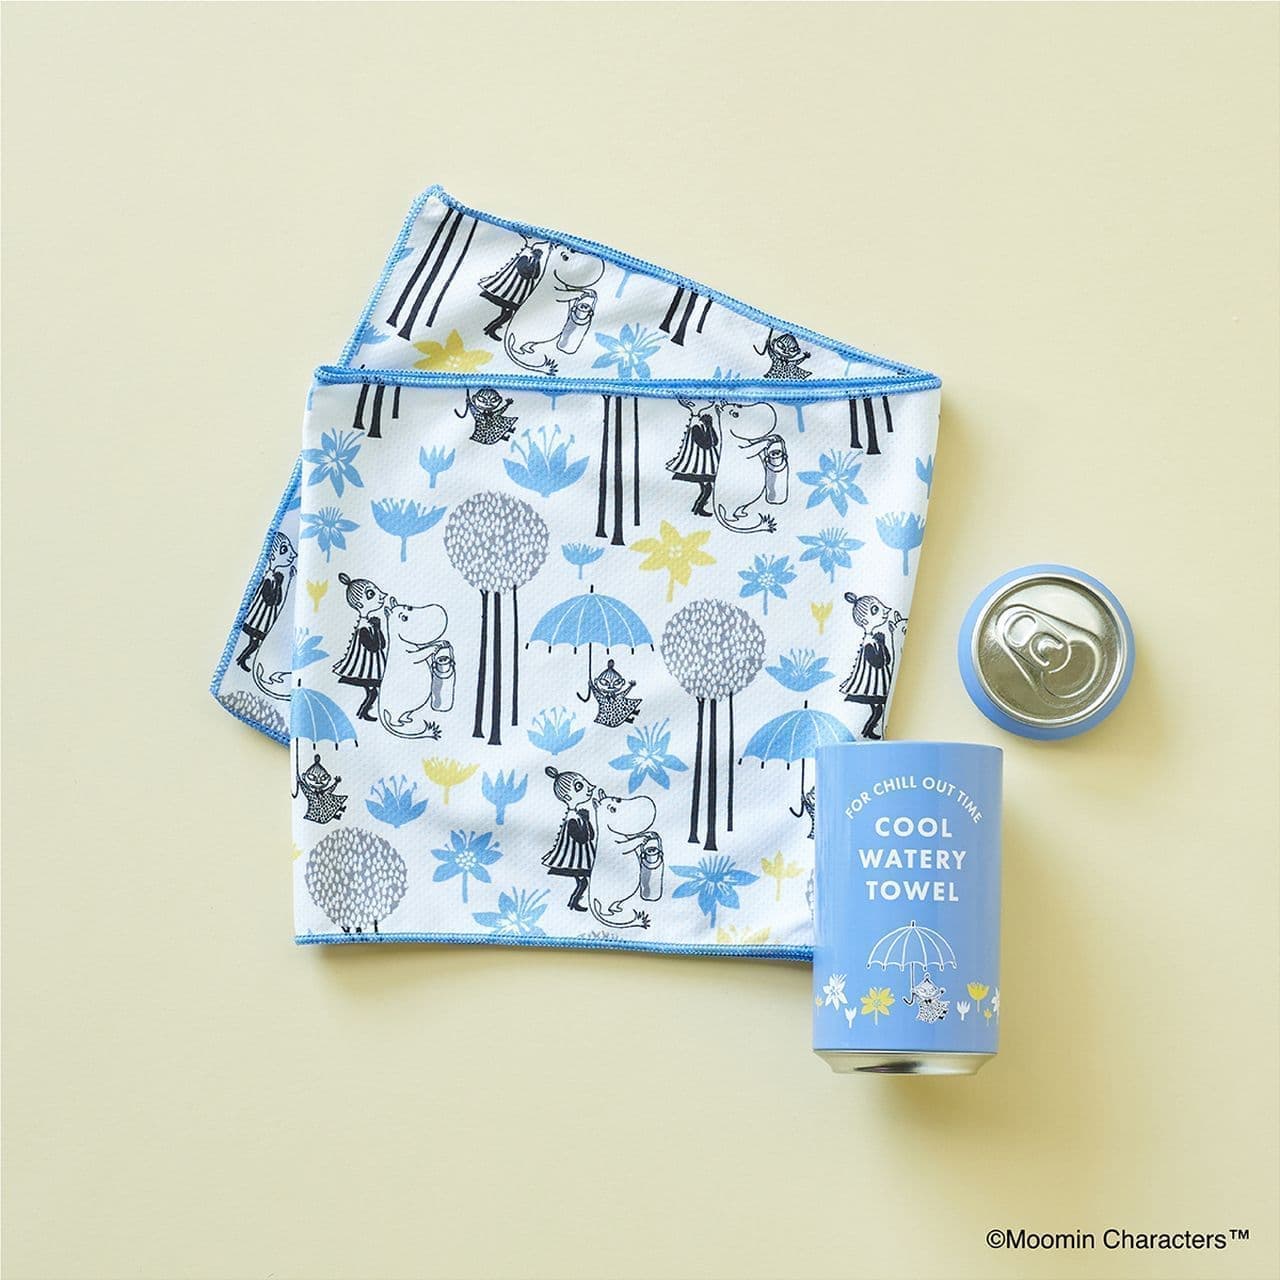 Afternoon Tea LIVING Moomin picture book design "LITTLE MY collection" summer items